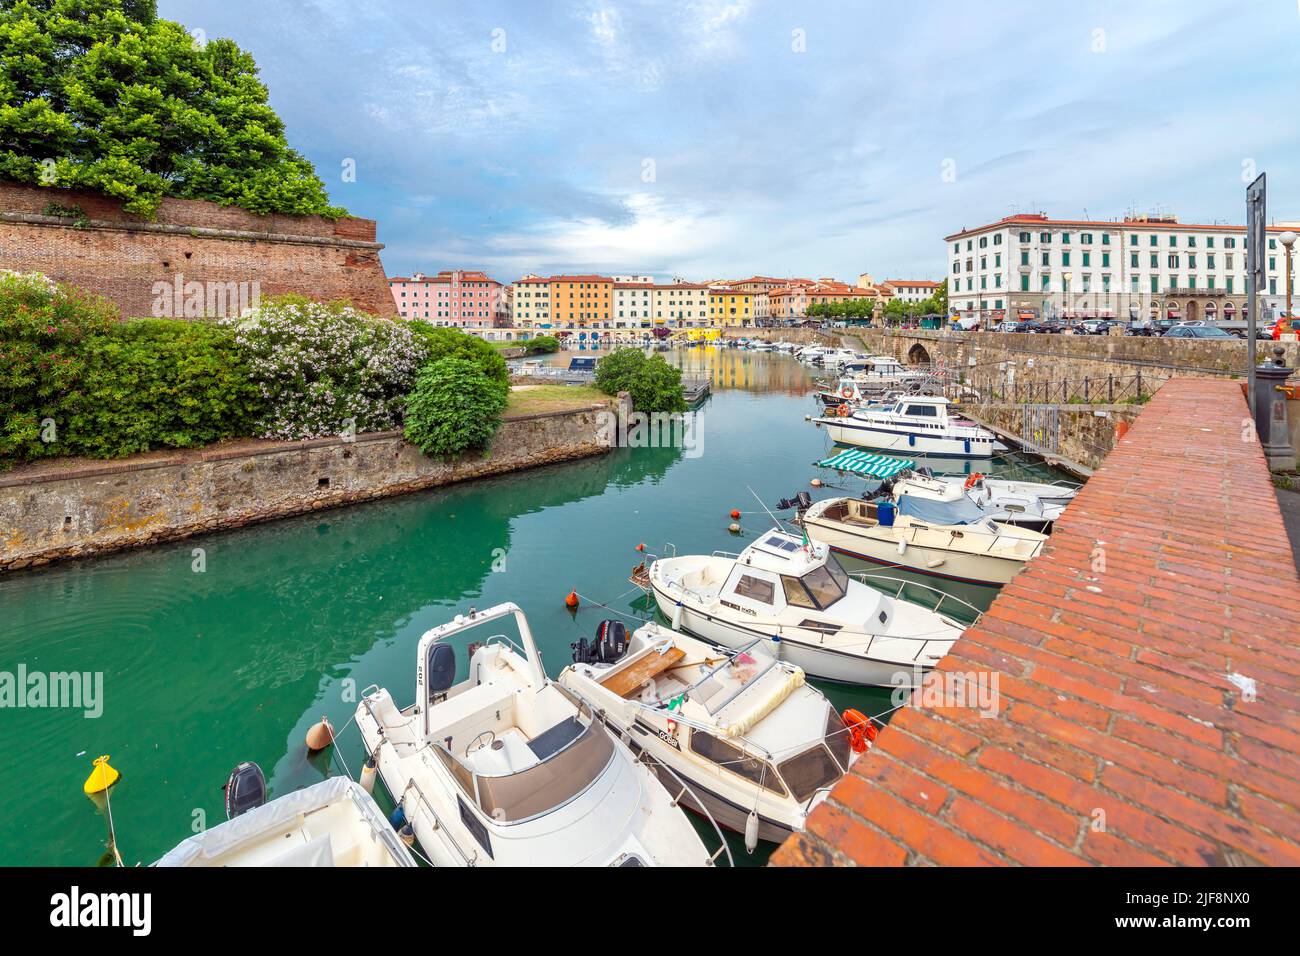 Boats line the crowded canals next to the New Fortress and an outdoor waterfront cafe at the seafront Tuscan city of Livorno, Italy. Stock Photo